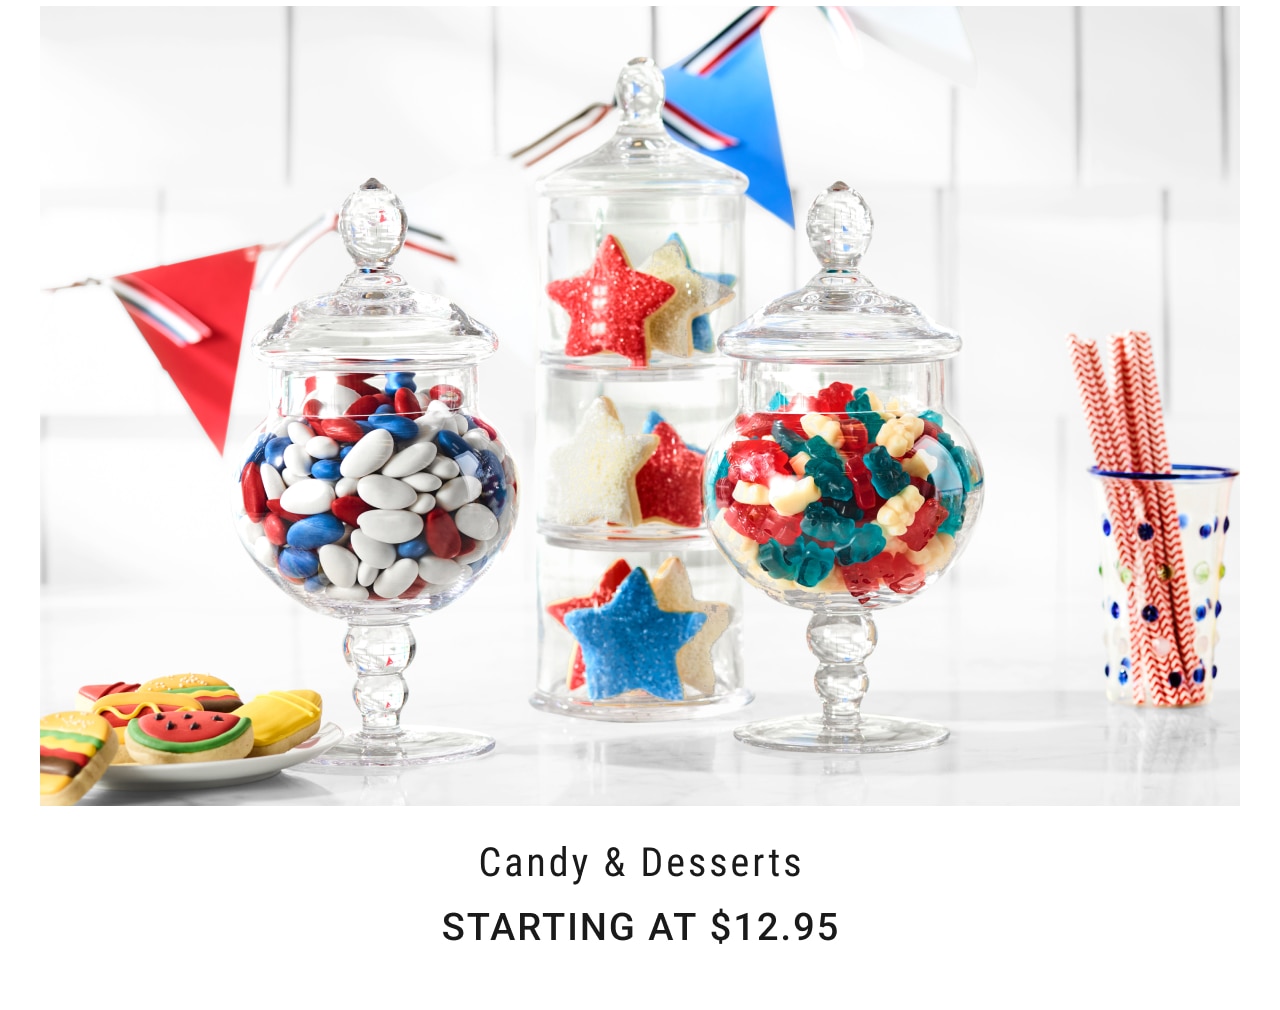 Candy & Desserts Starting at $12.95